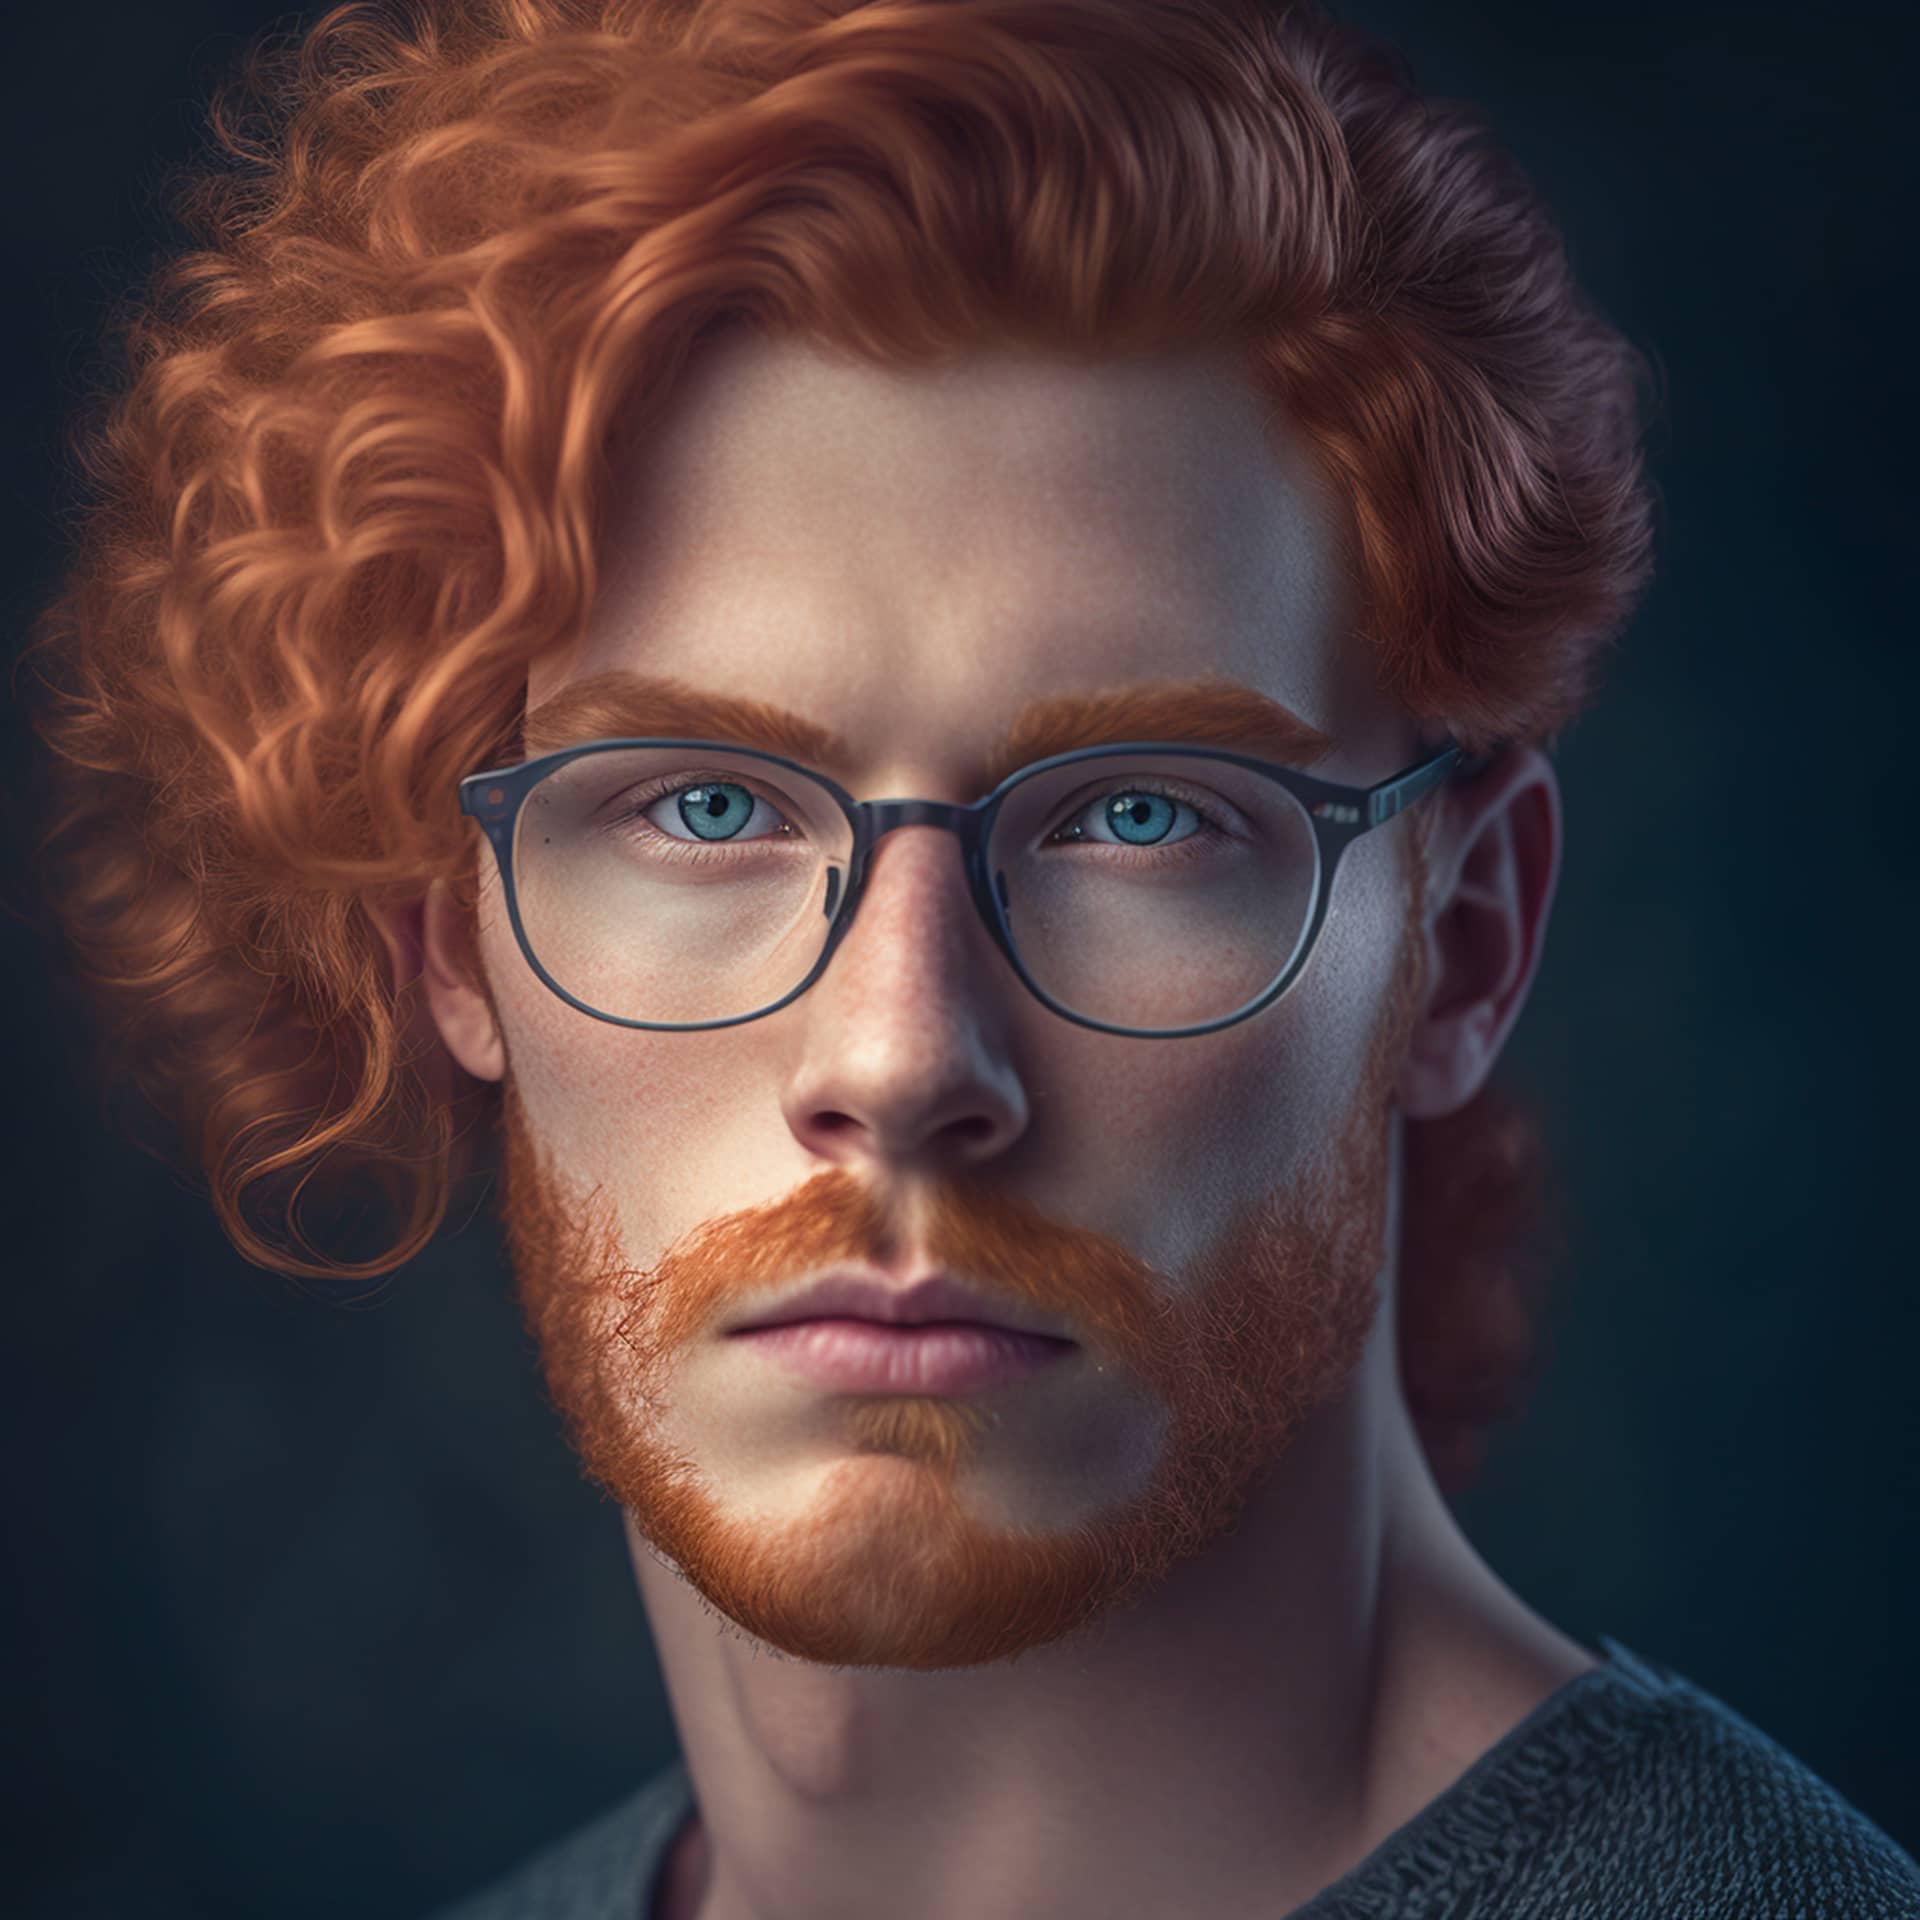 Male pictures for fake profile young red haired man glasses close up image